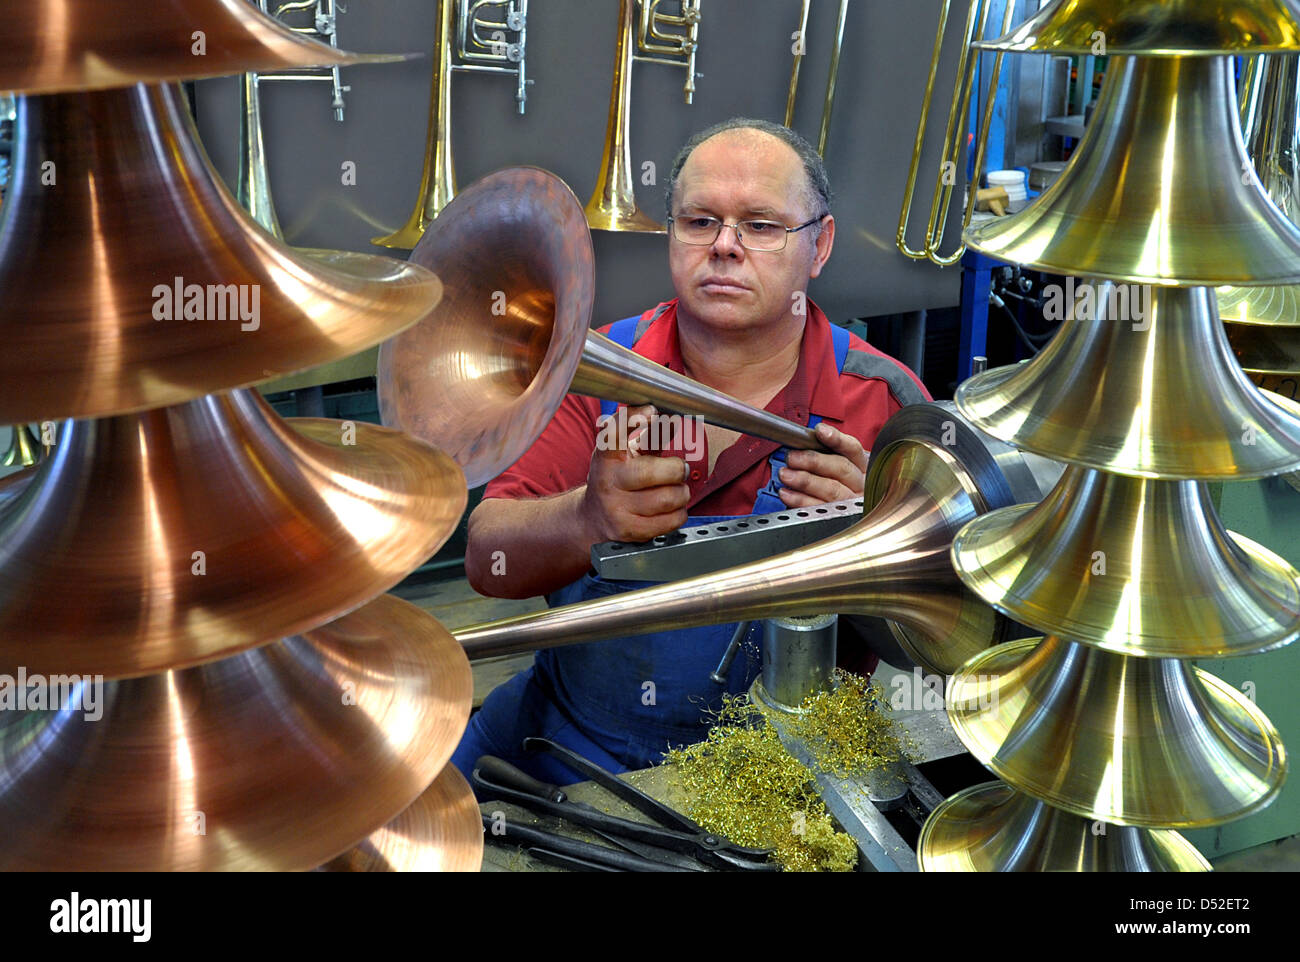 Instrument master builder Juergen Voigt manufactures premium brass instruments in his workshop in Markneukirchen, Germany, 16 February 2010. The Vogtland region has been for more than 350 years a worldwide unique area with high-class instrument master builders in and around Markneukirchen and Klingenthal. Photo: Wolfgang Thieme Stock Photo